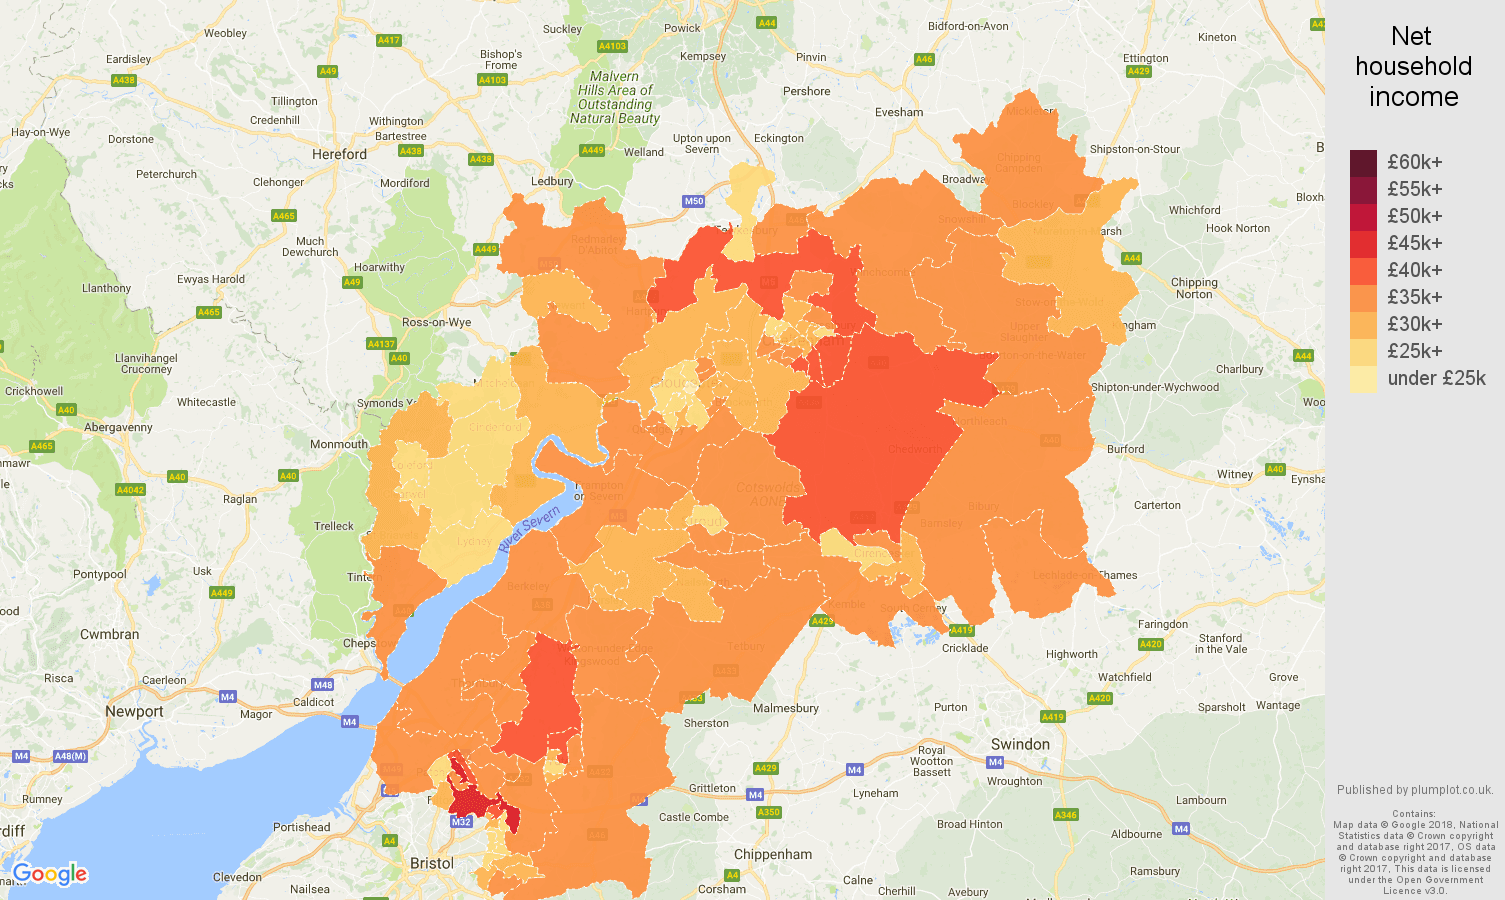 Gloucestershire net household income map